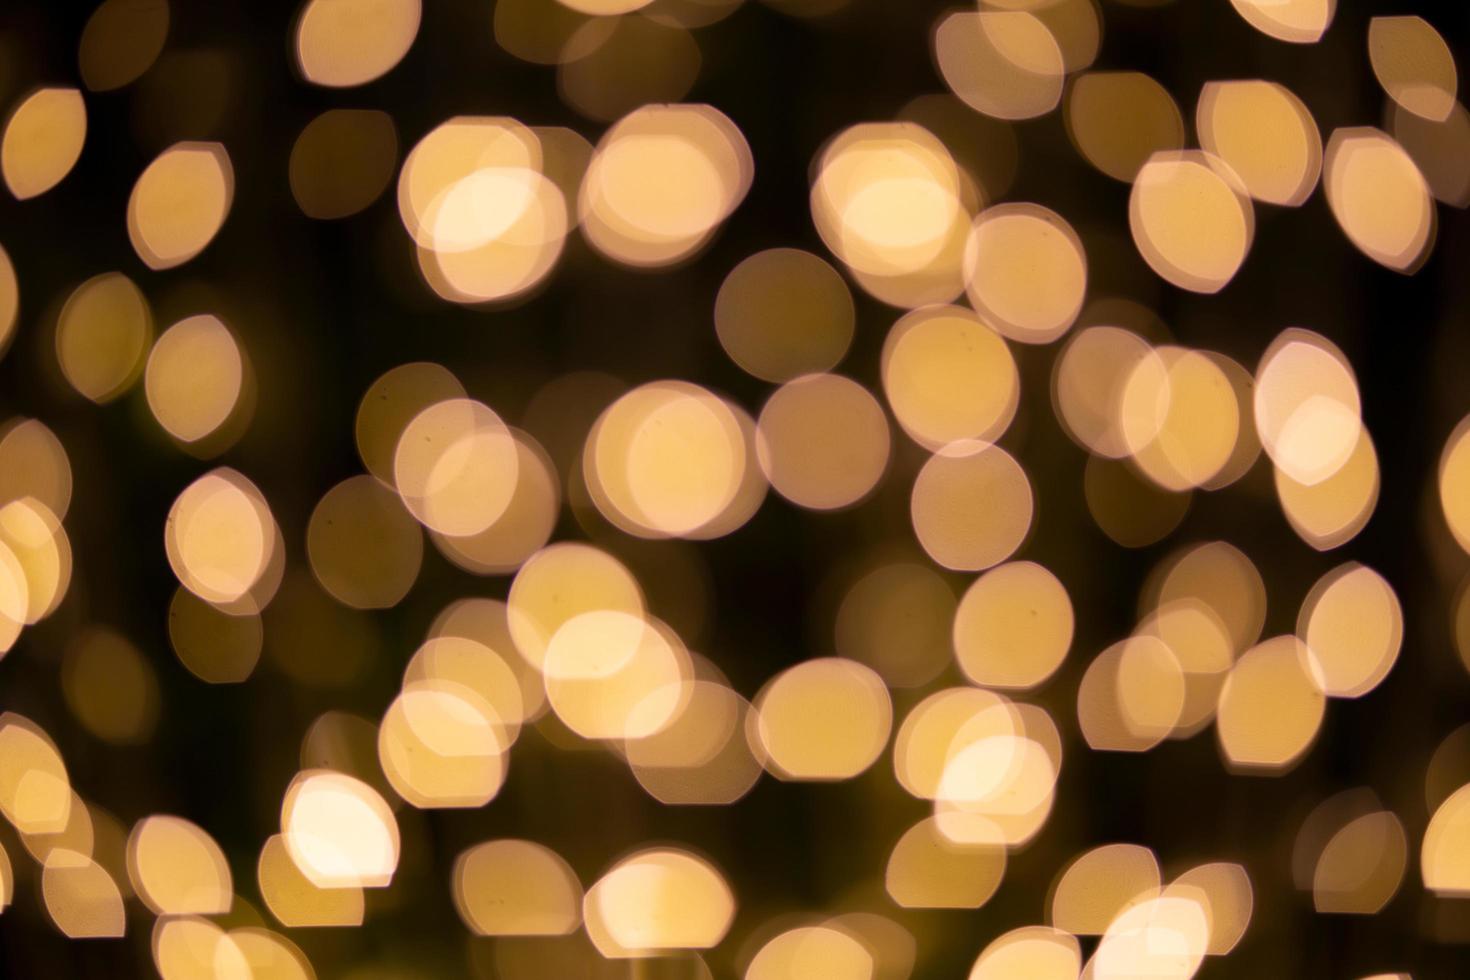 Abstract blurred Christmas light bokeh background. photo